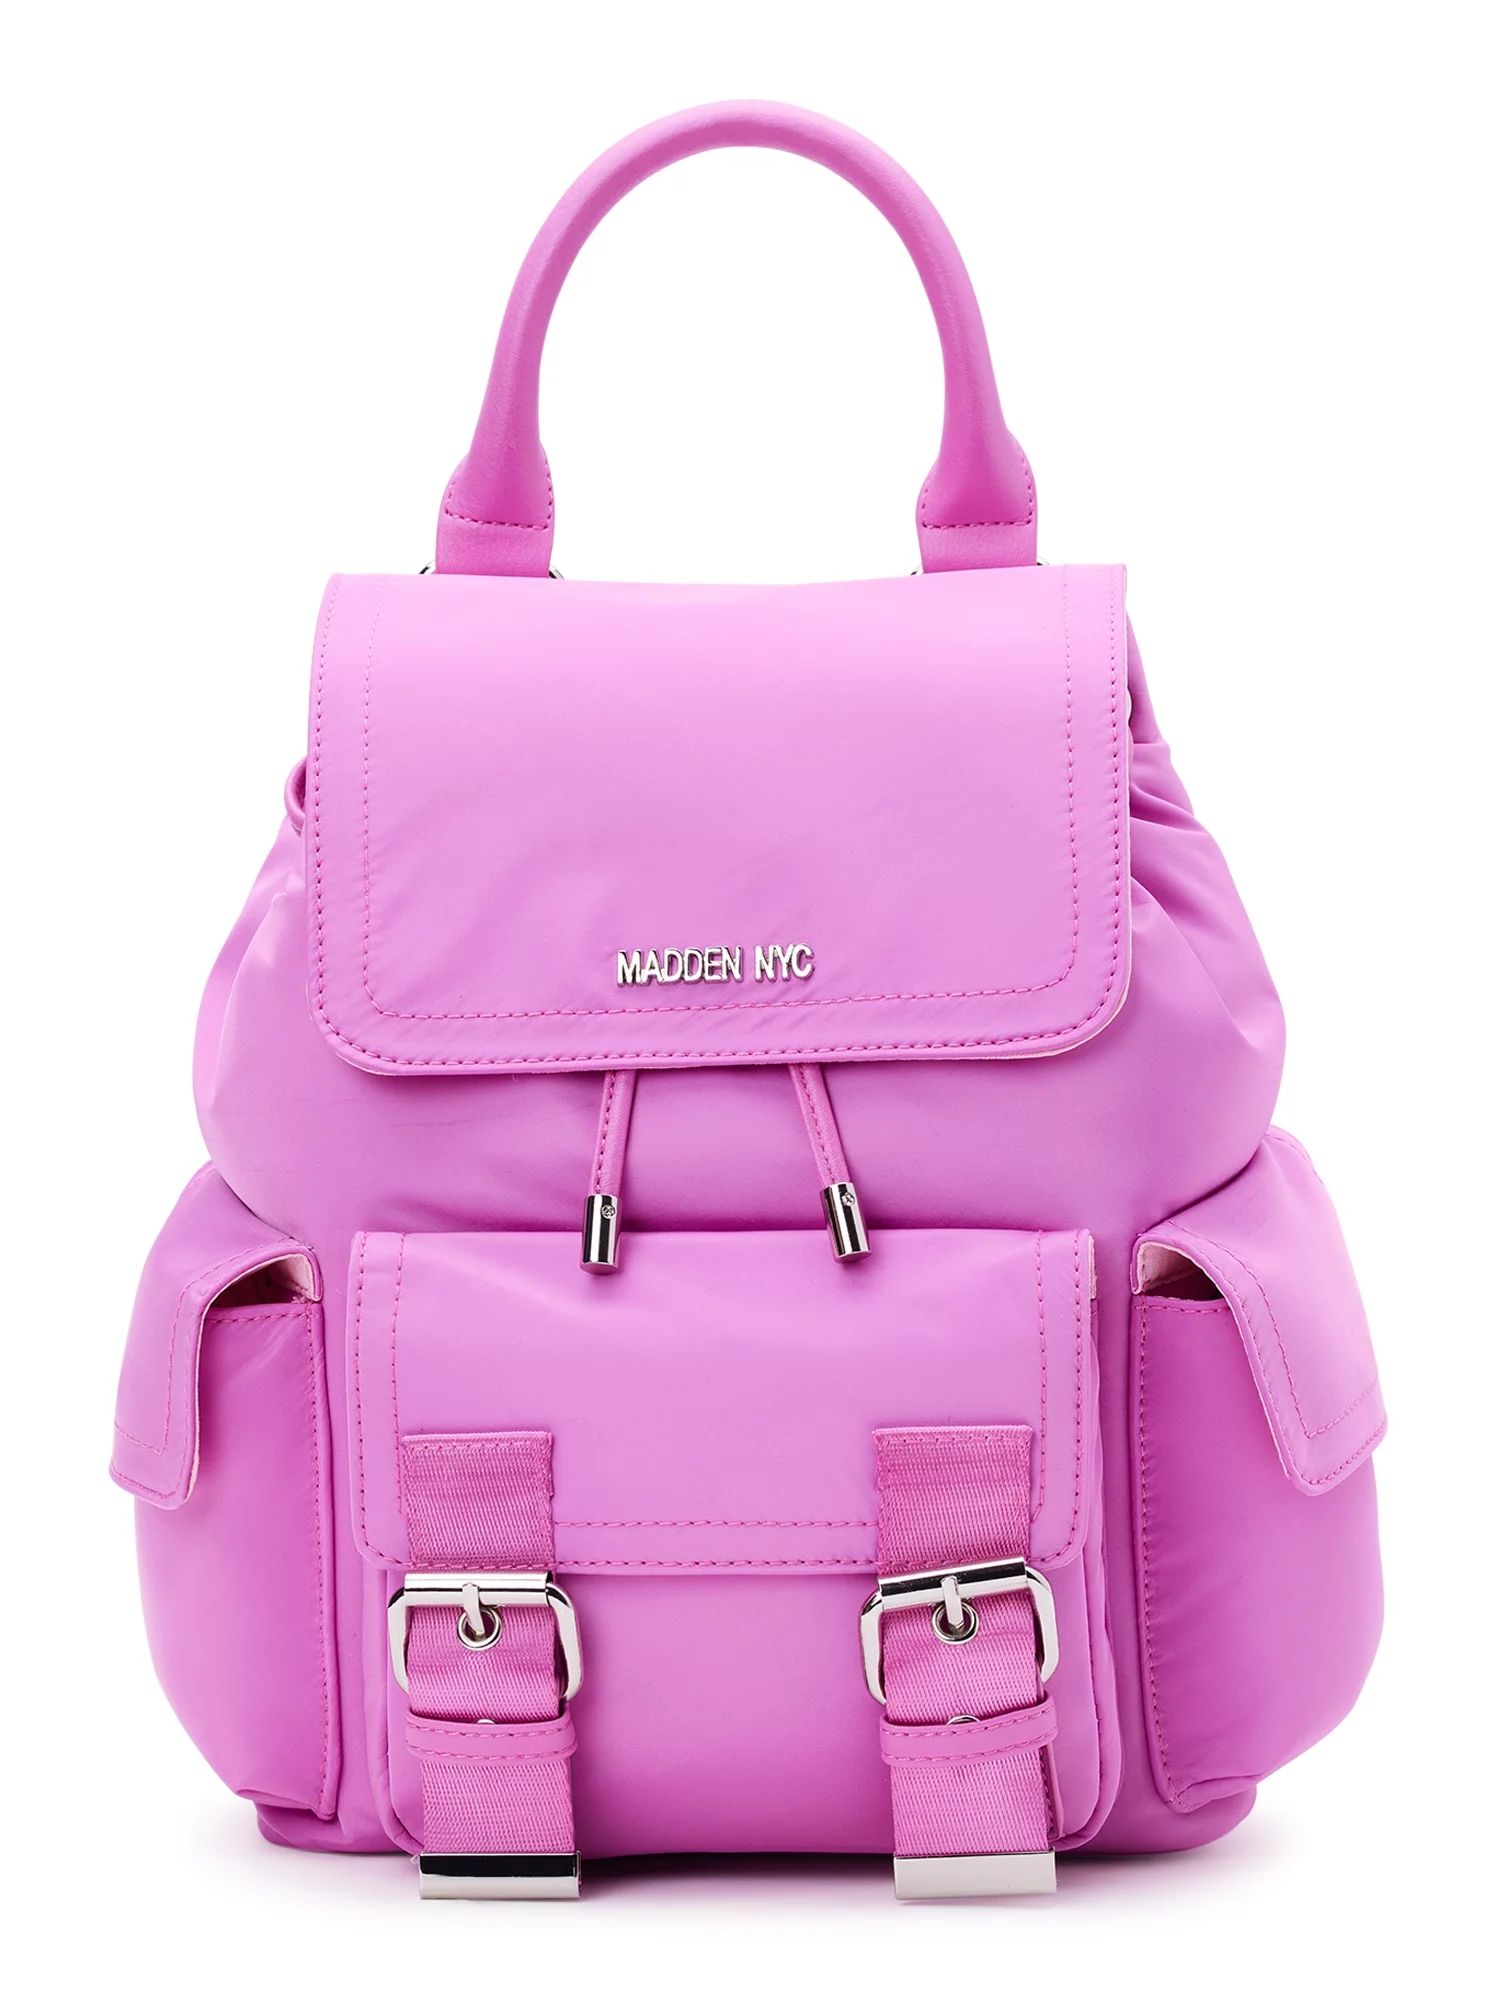 Madden NYC Women's Buckle Flap Backpack, Pink | Walmart (US)